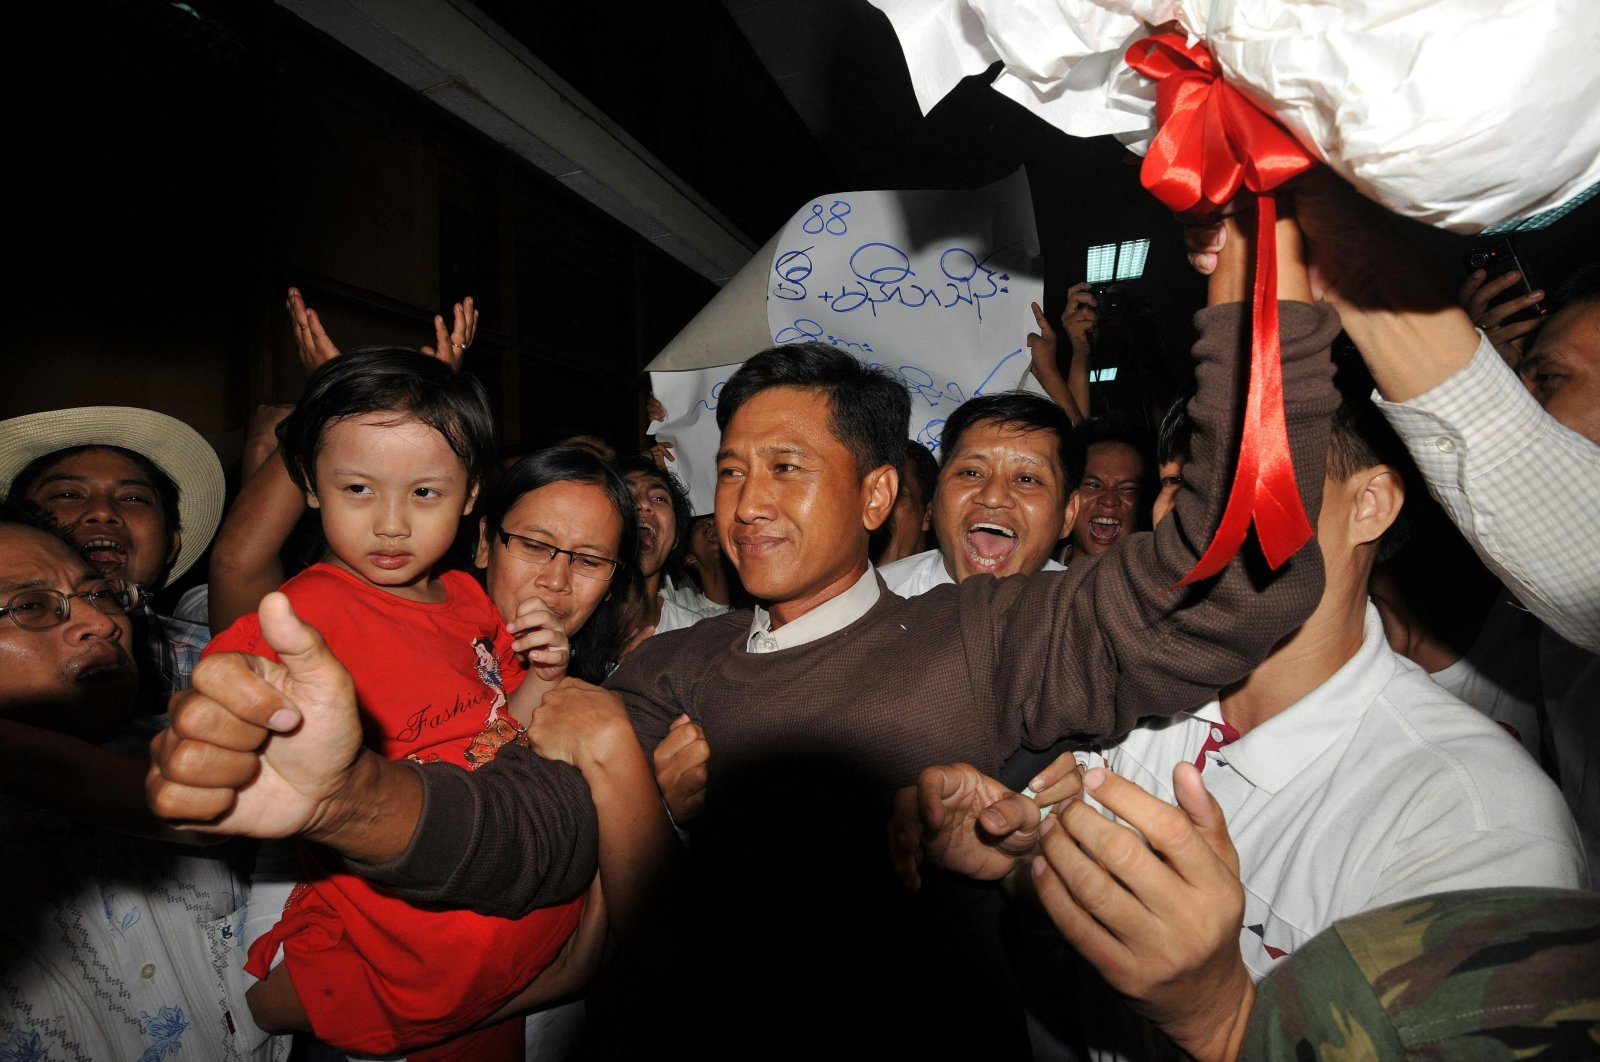 Kyaw Min Yu (C), known as Jimmy, and his wife Ni Lar Thein (L) holding her child, both members of the 88 Generation student group, celebrate upon their arrival at Yangon international airport following their release from detention, Myanmar, Jan. 13, 2012. (AFP File Photo)